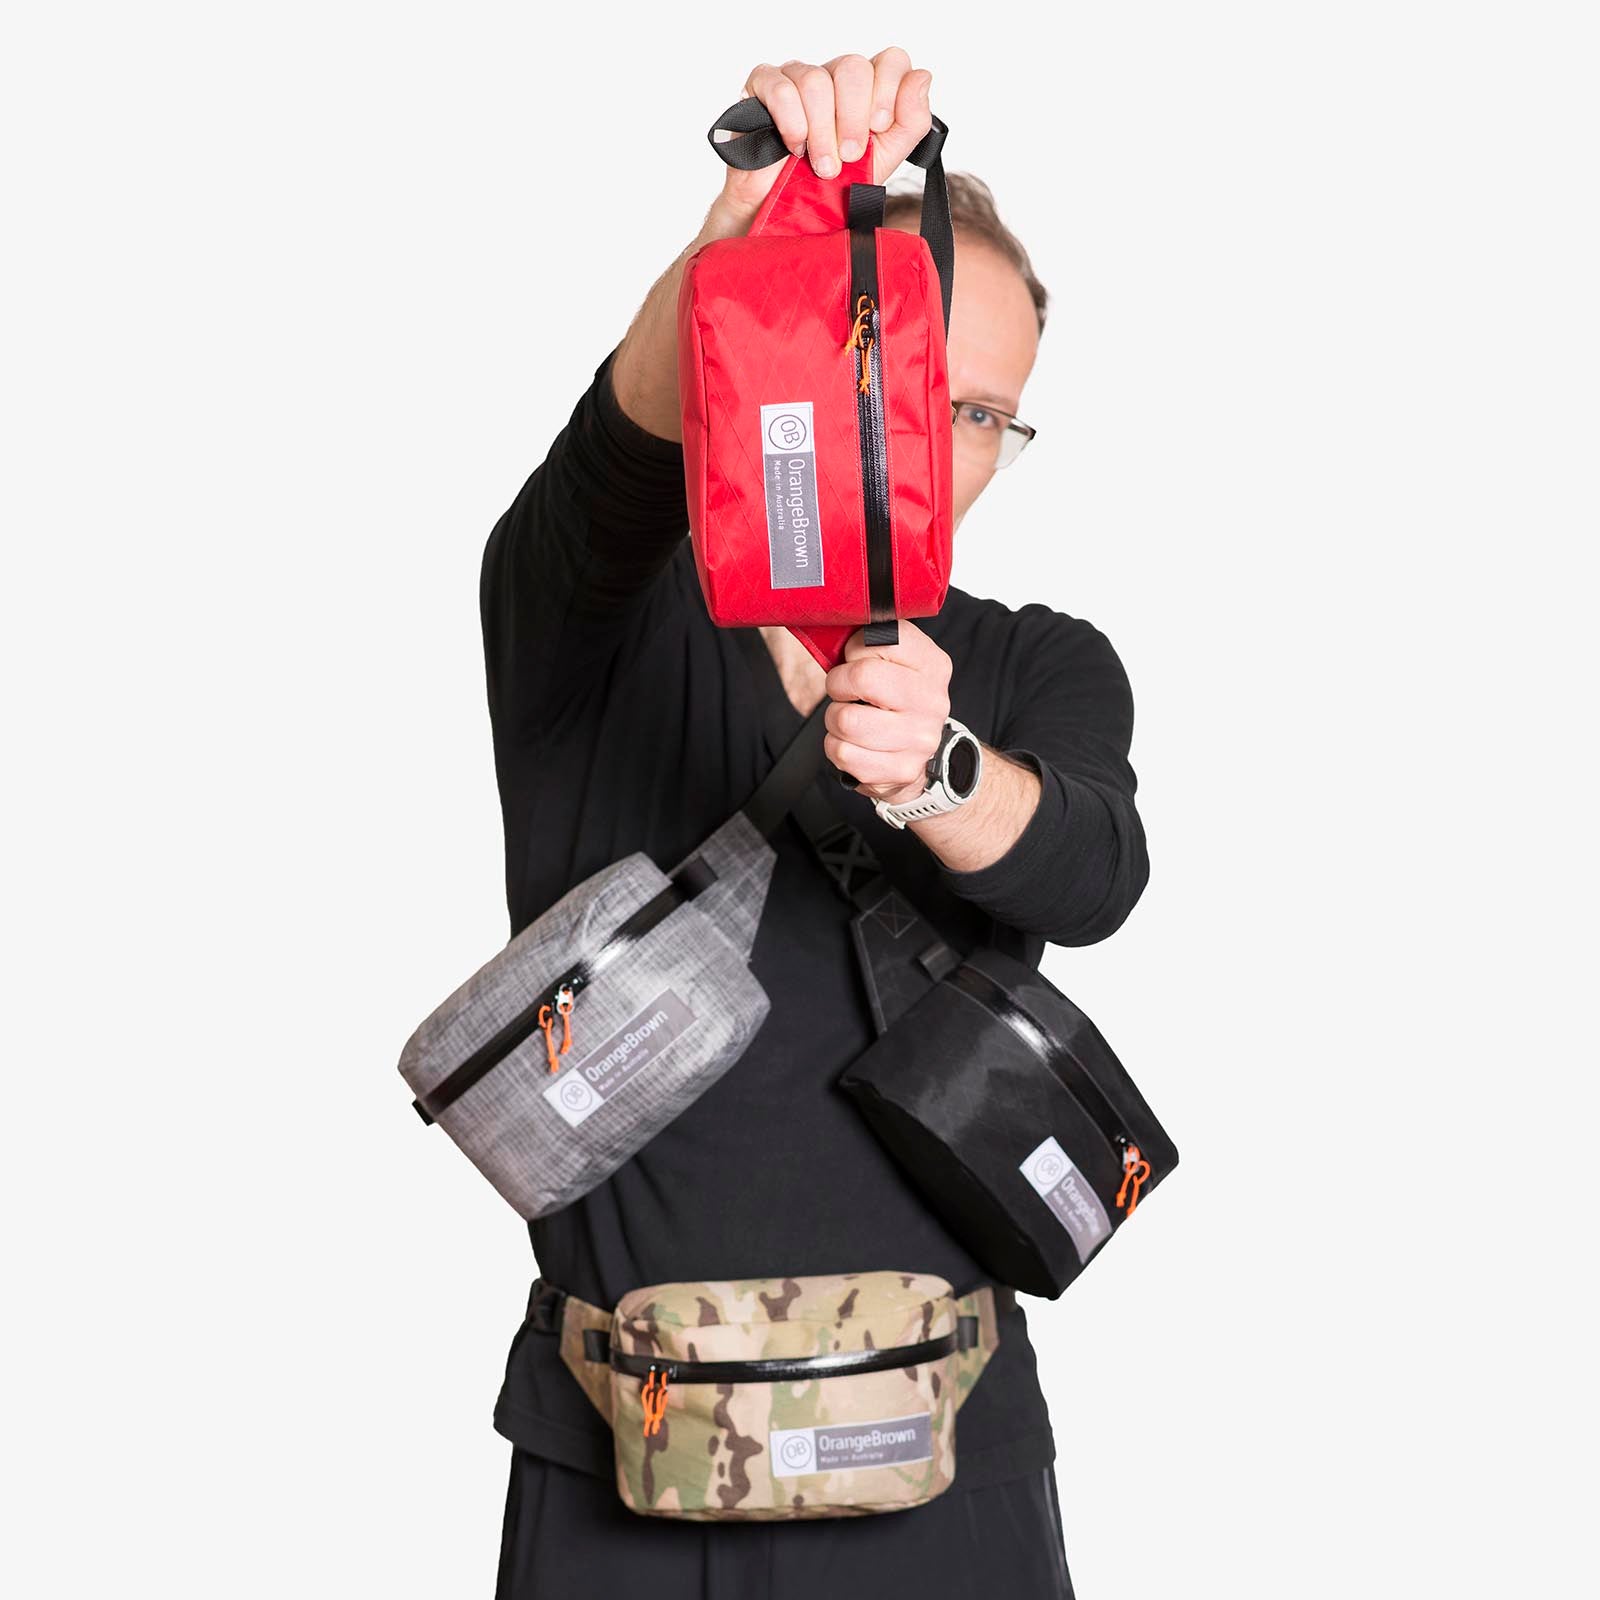 Four fanny packs for hiking and walking are held for presentation by one person. 